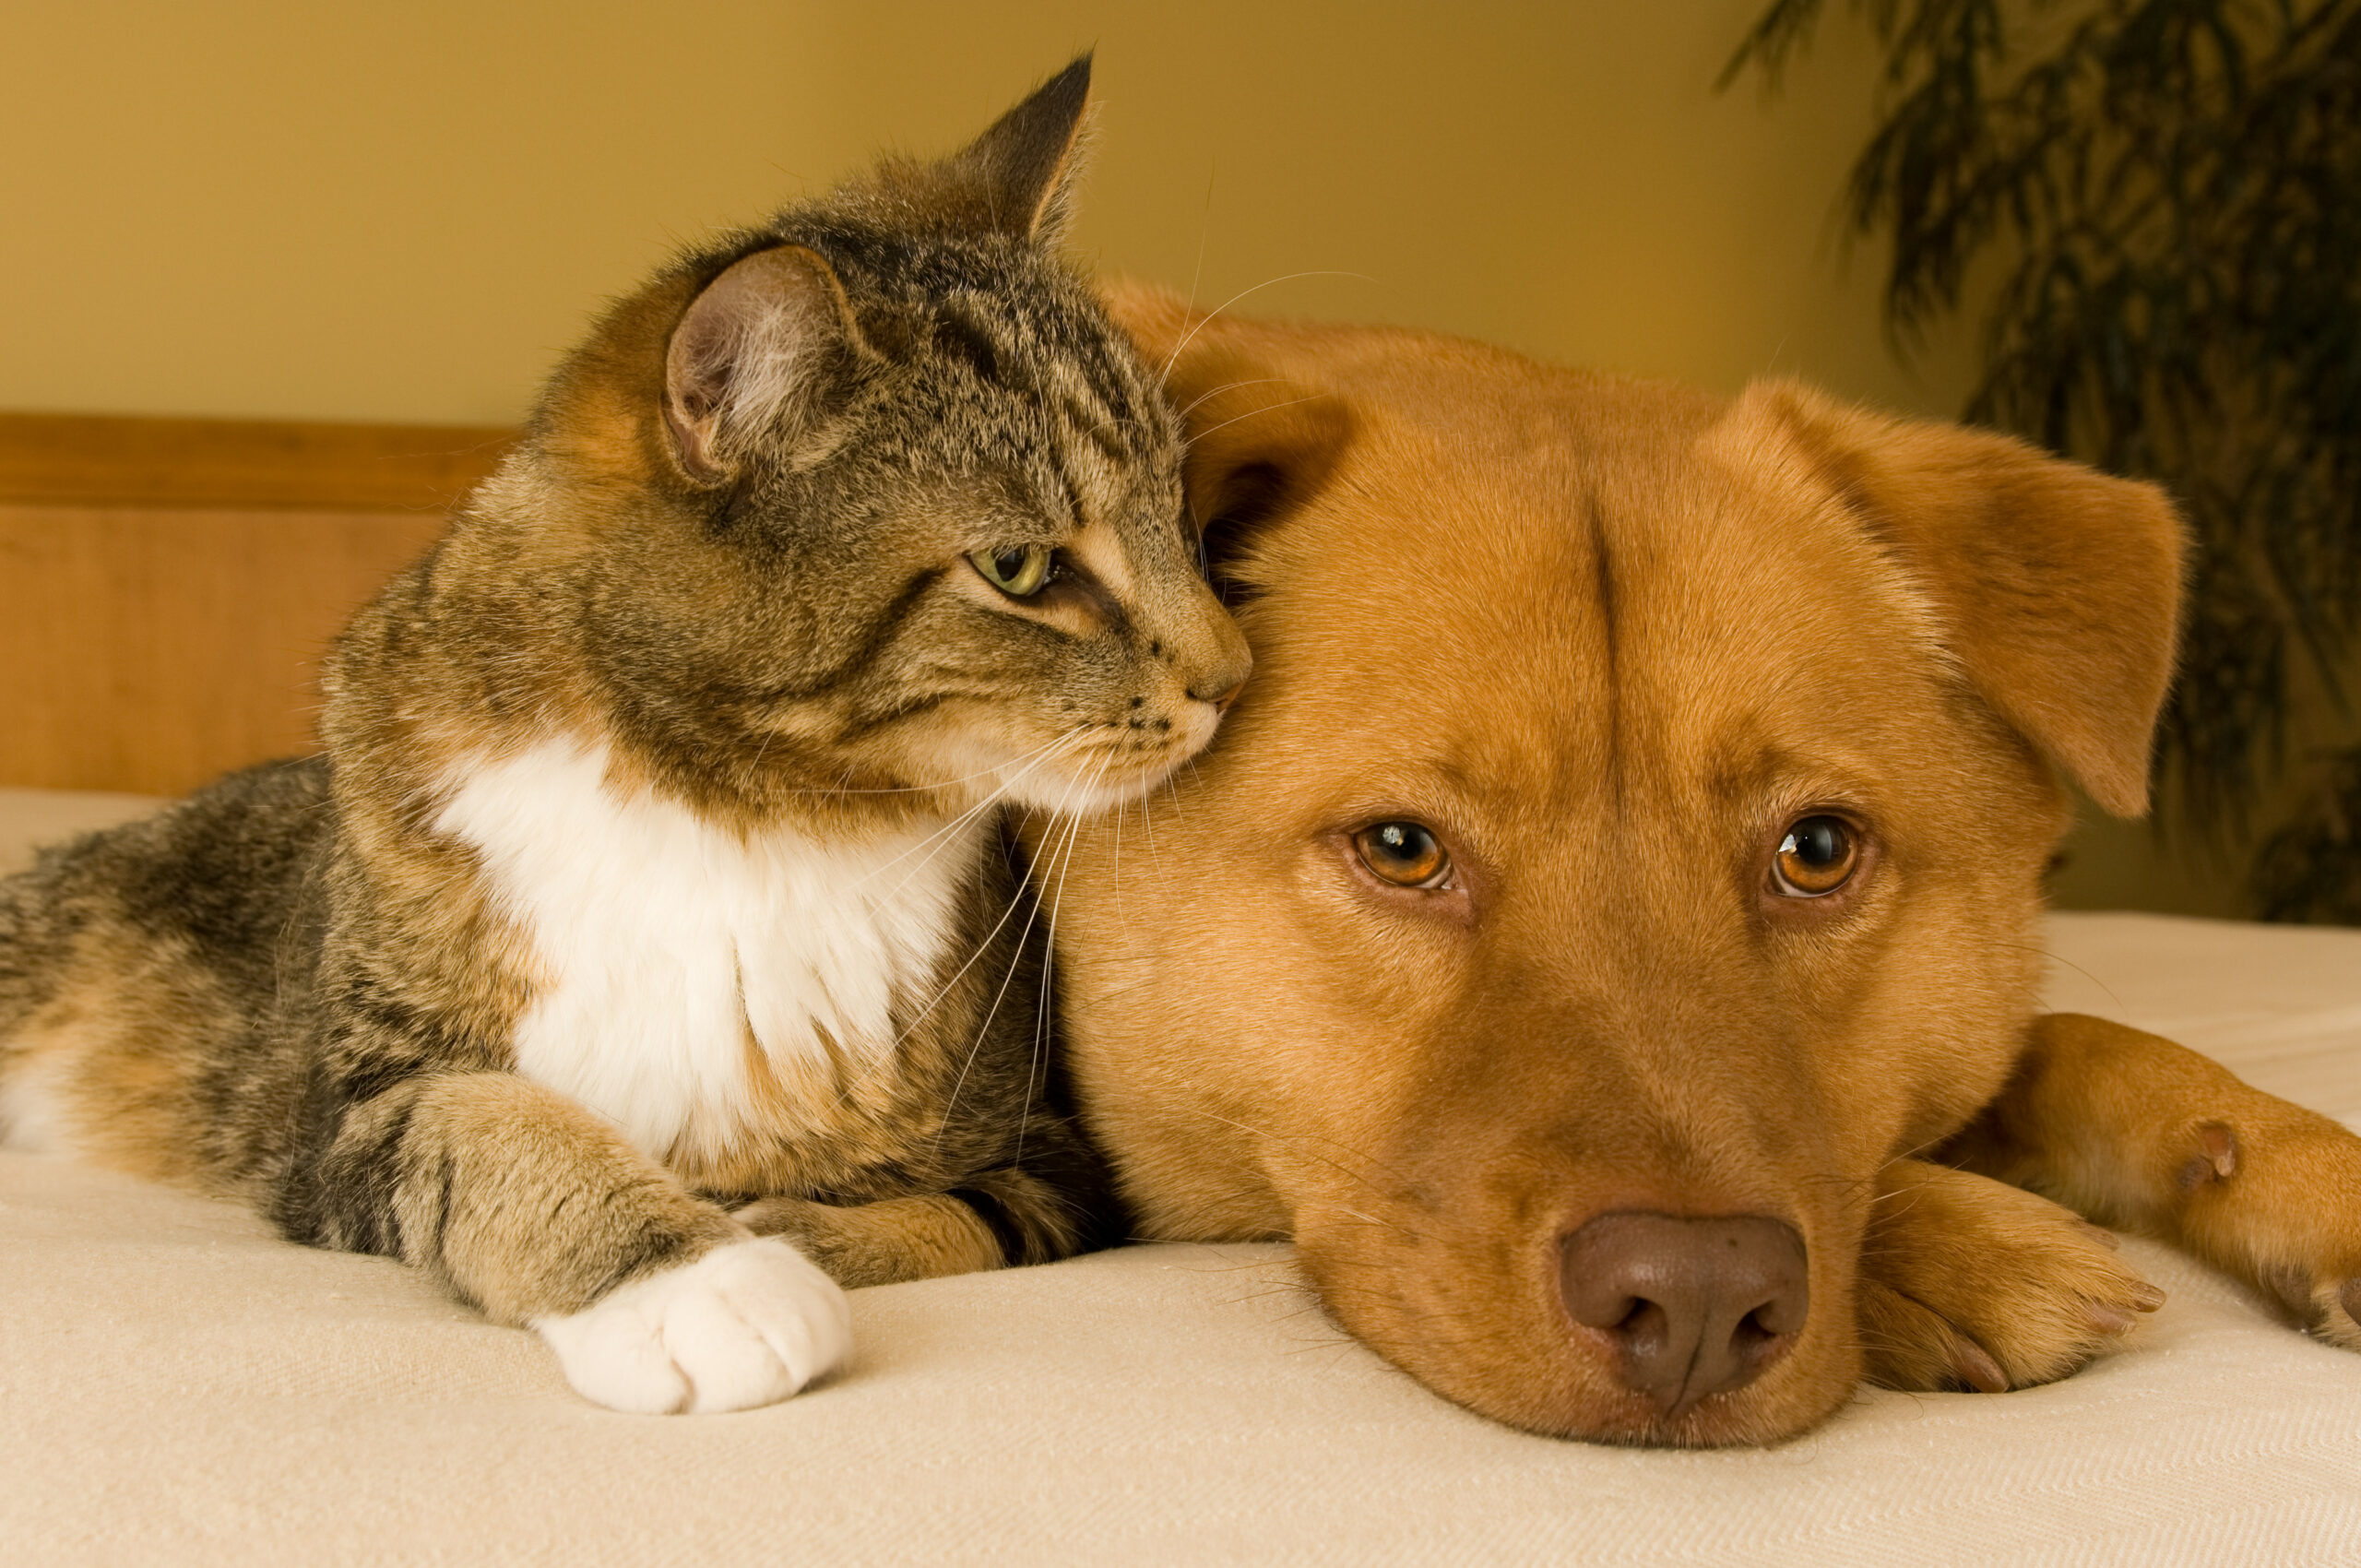 Tabby cat snuggling with brown dog